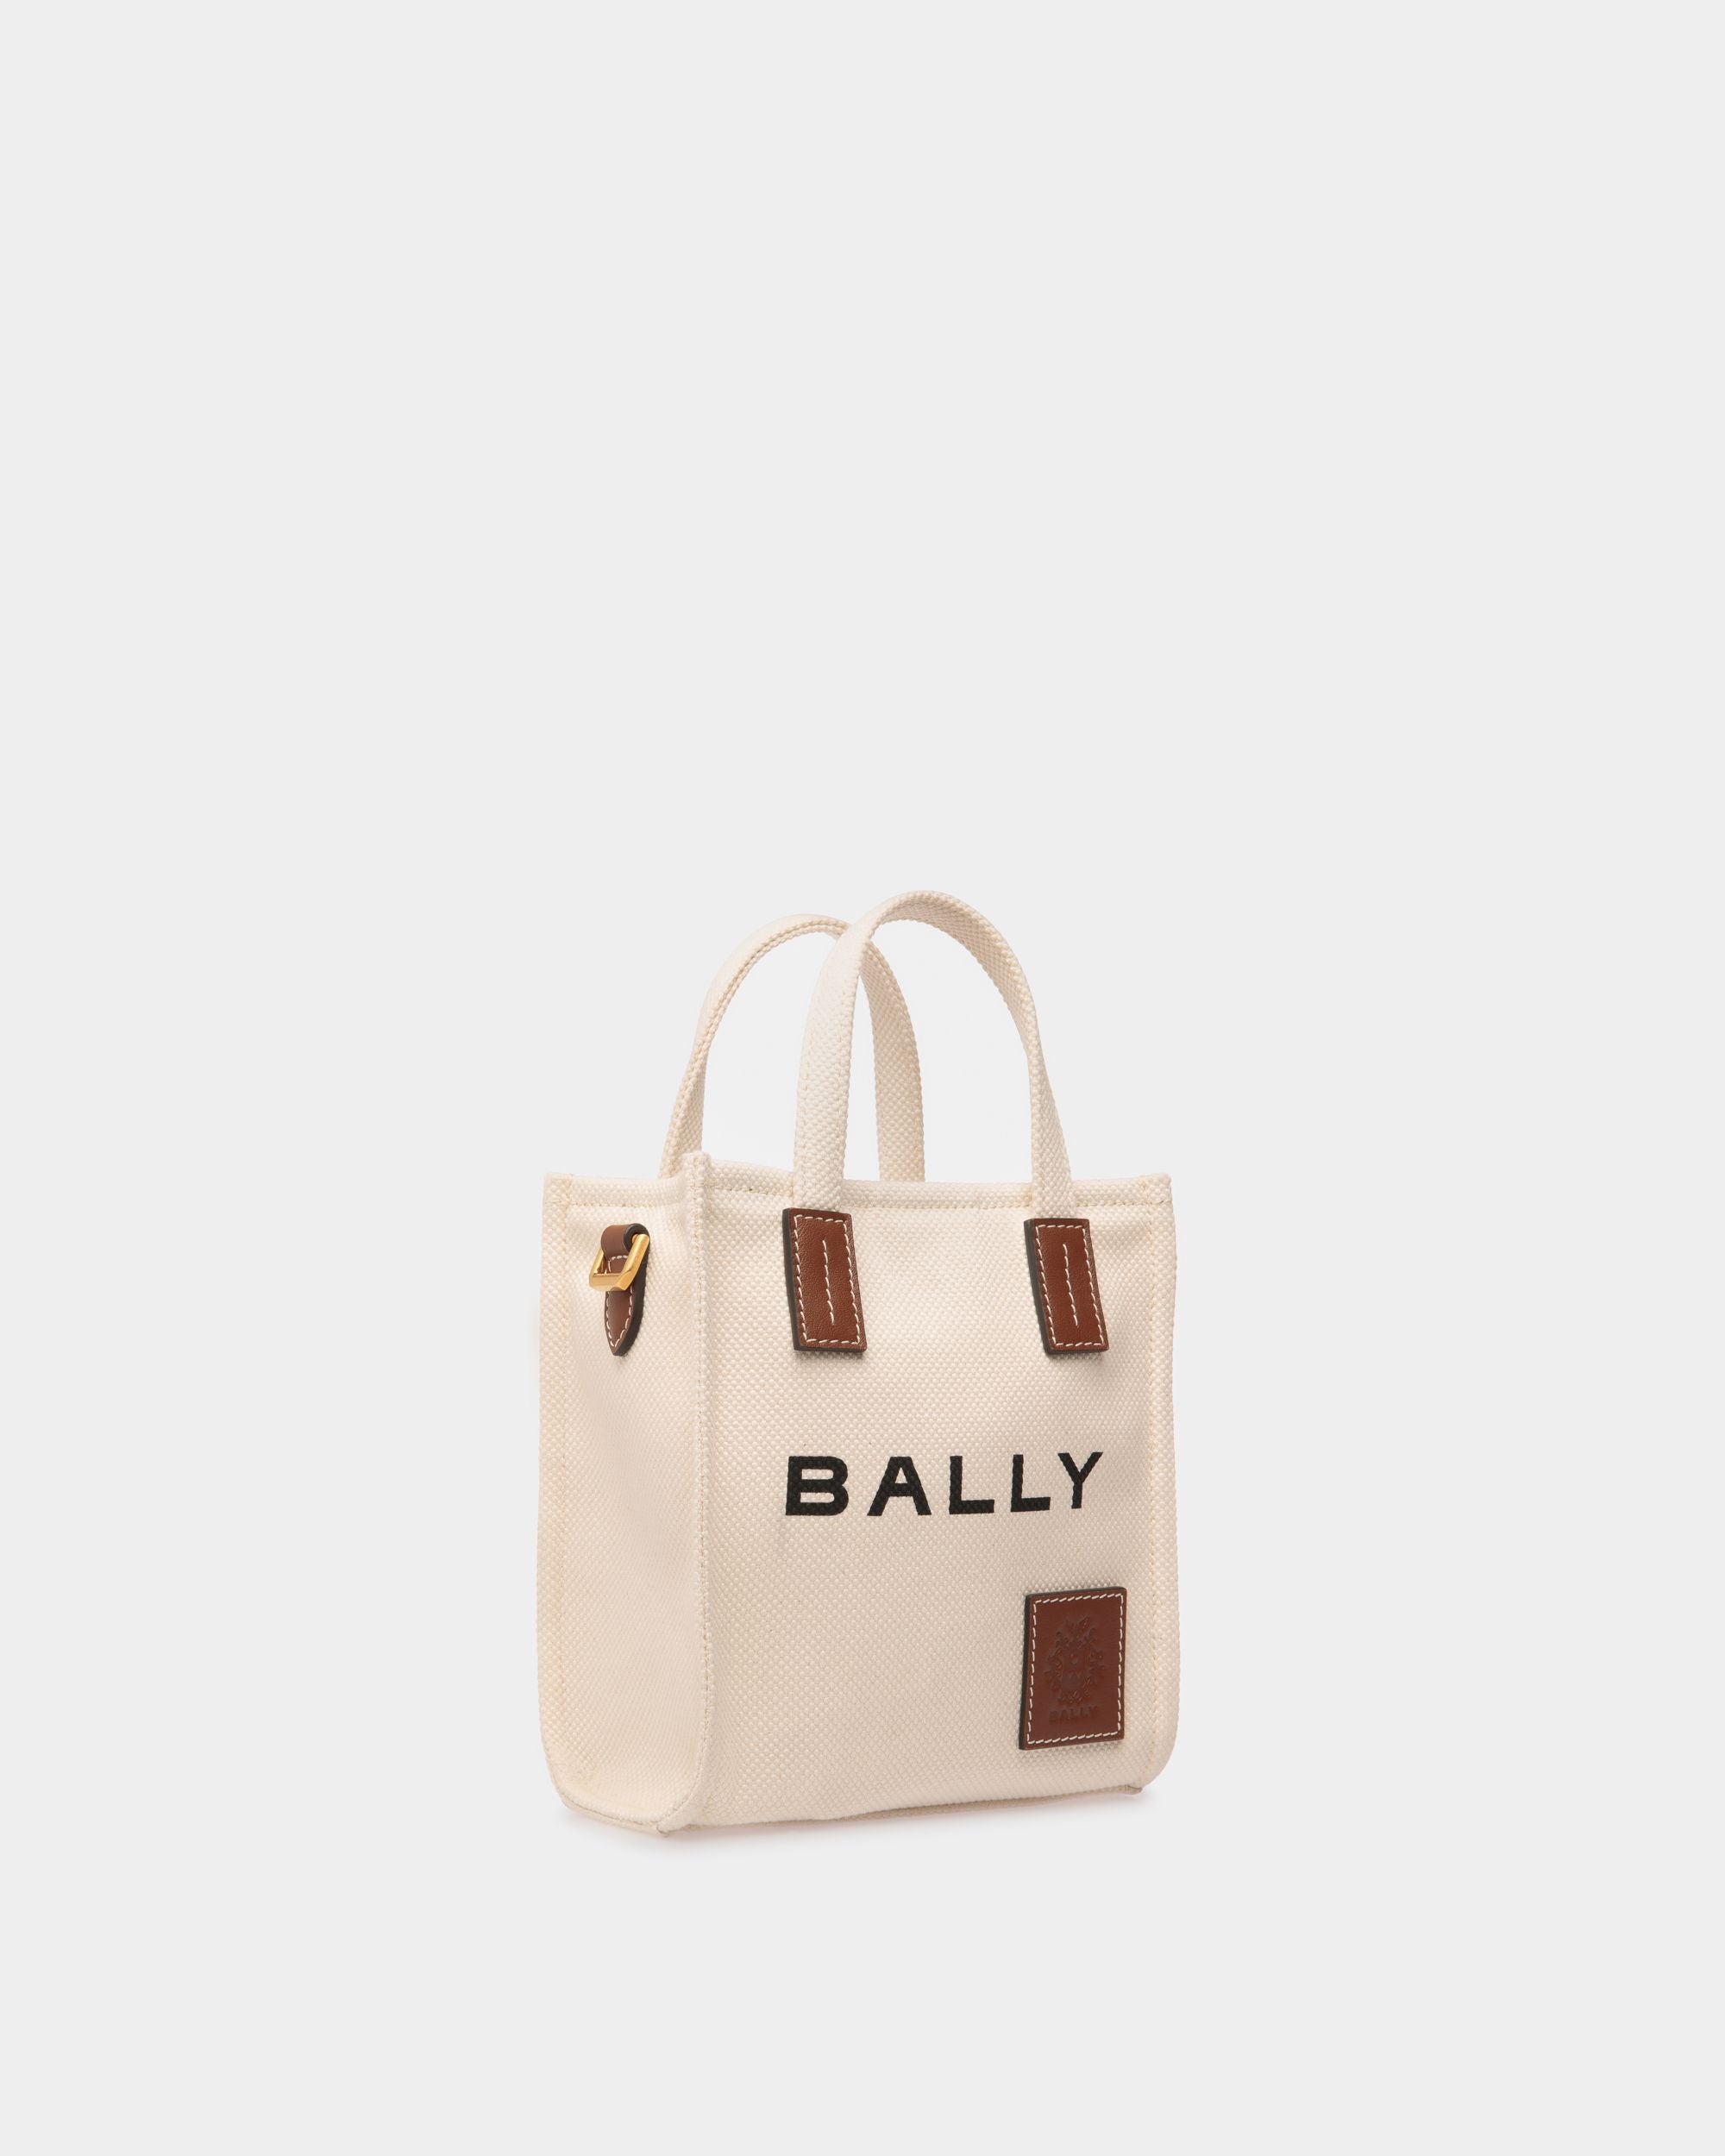 Akelei | Women's Mini Tote Bag in Neutral Canvas | Bally | Still Life 3/4 Front